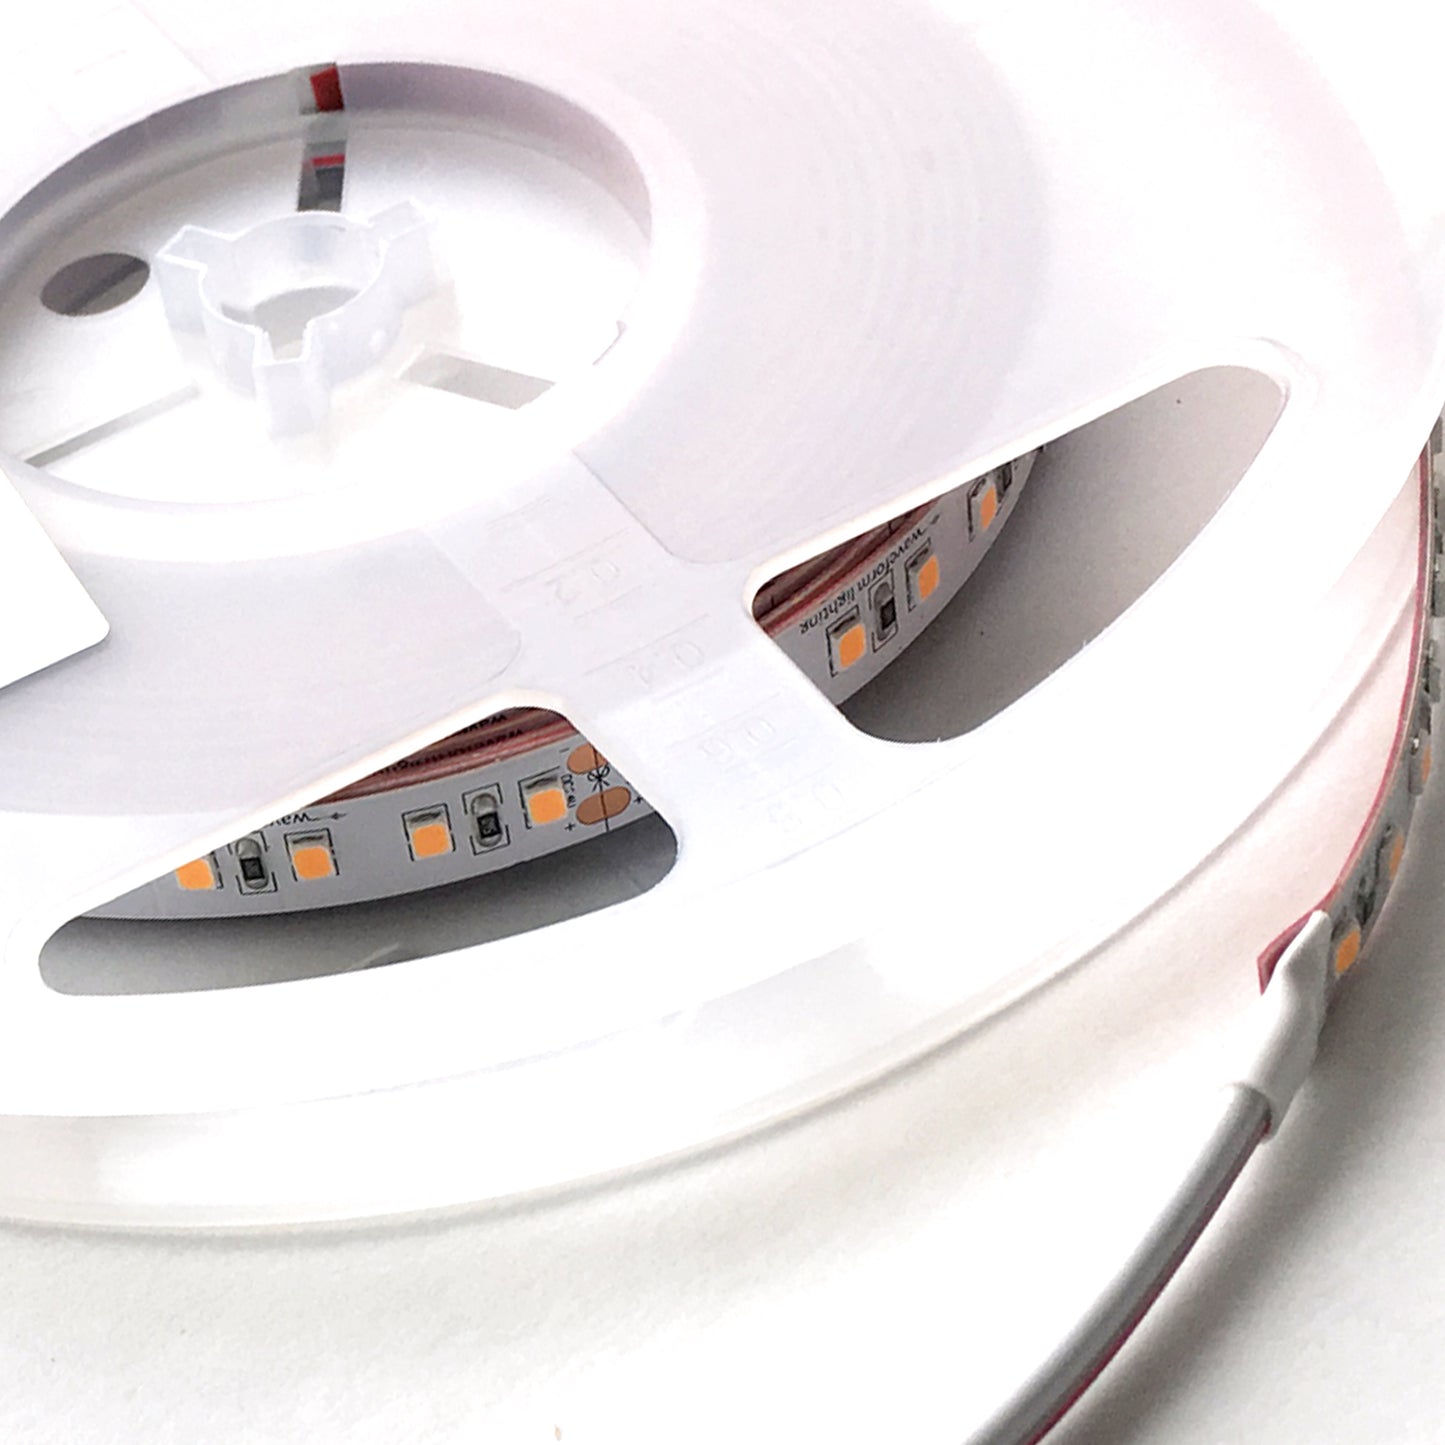 CENTRIC HOME™ LED Strip Lights for Home & Residential